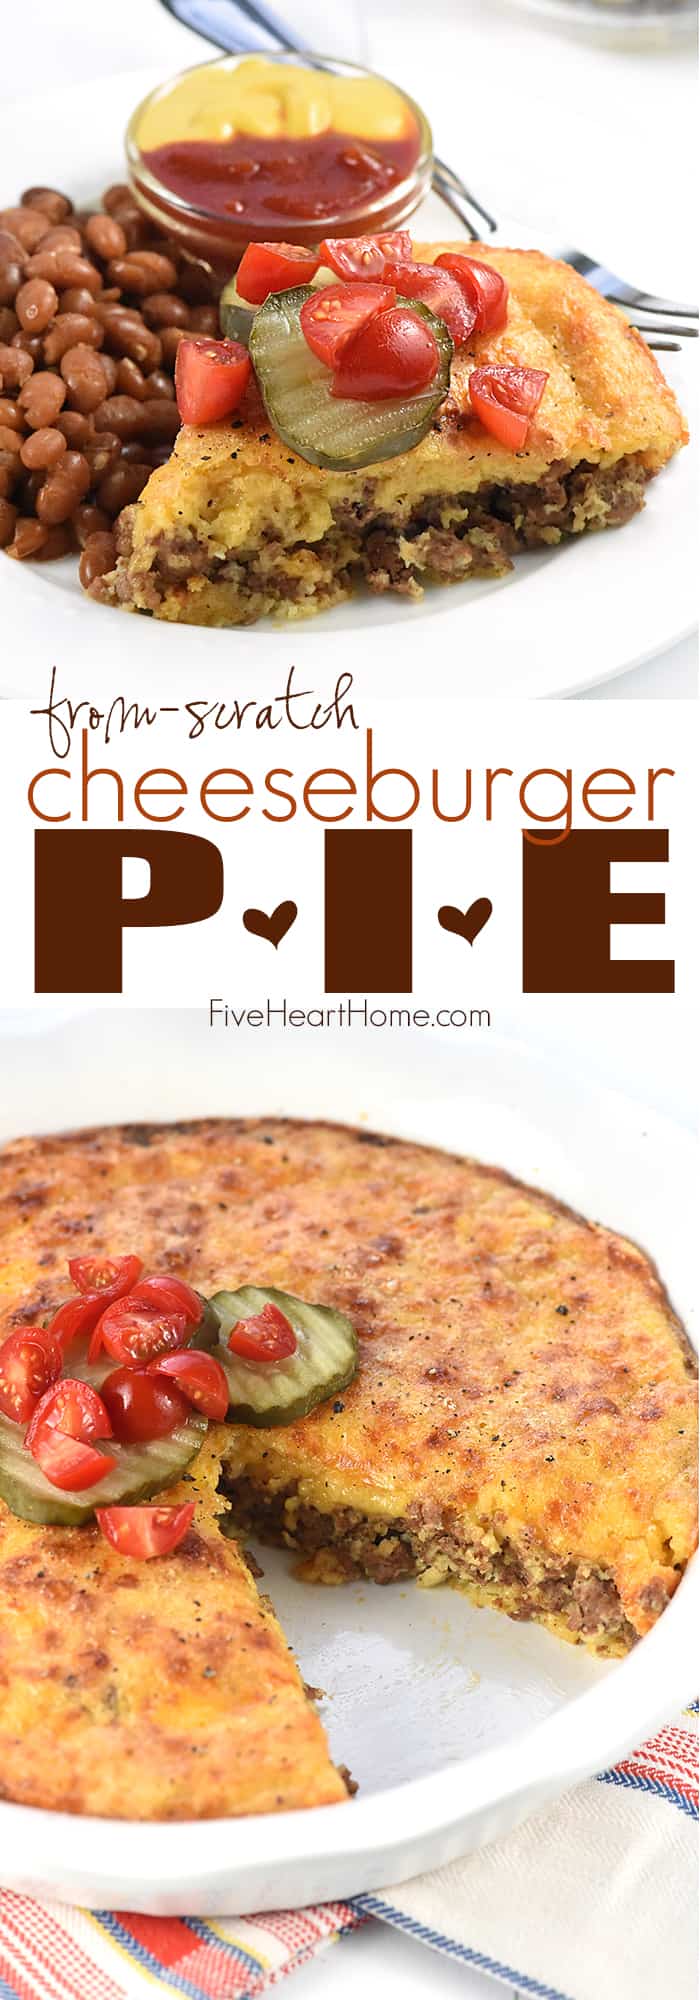 Impossible Cheeseburger Pie ~ this wholesome, from-scratch twist on the classic features seasoned ground beef, grated cheddar cheese, and a homemade topping made with whole wheat flour and NO Bisquick! | FiveHeartHome.com via @fivehearthome